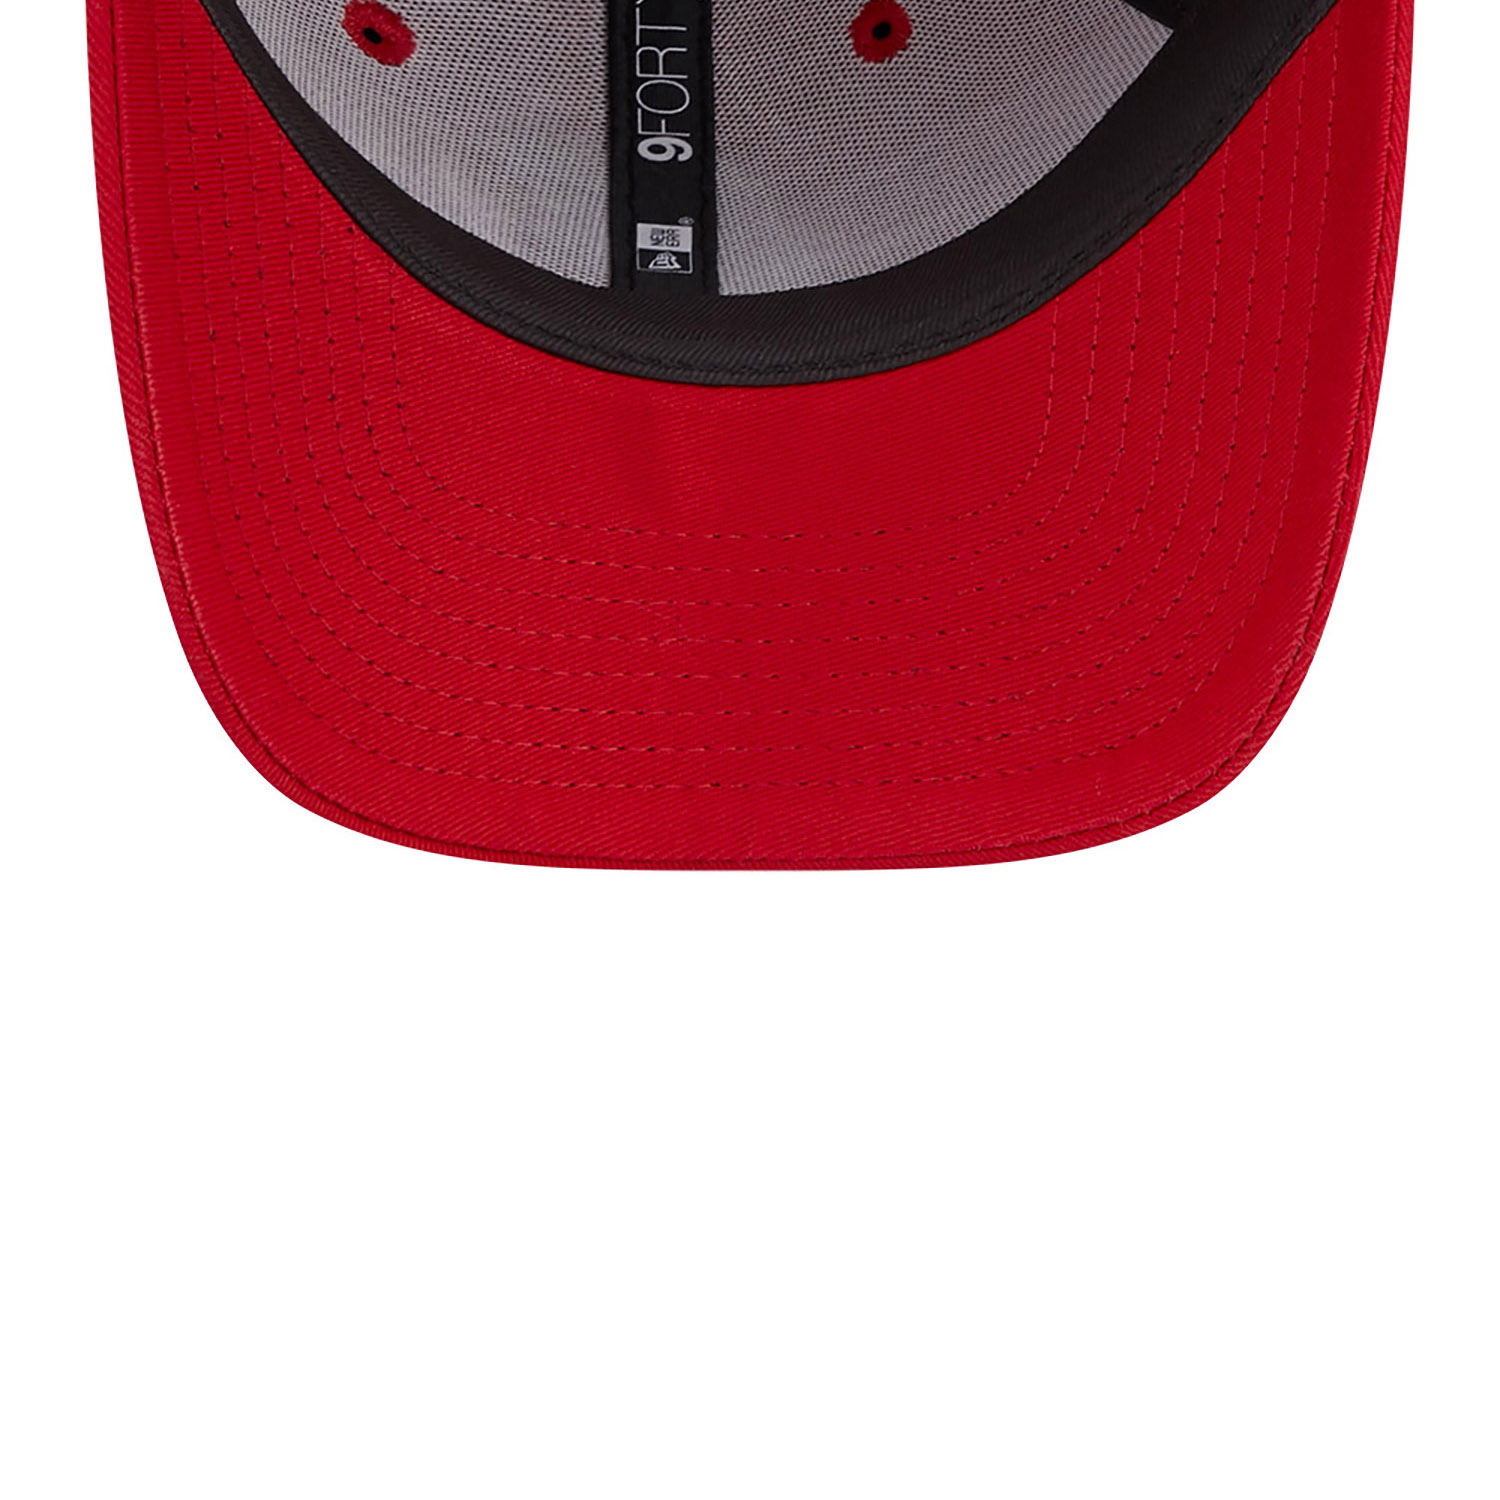 New Era Mascot Youth Red 9FORTY Adjustable Cap